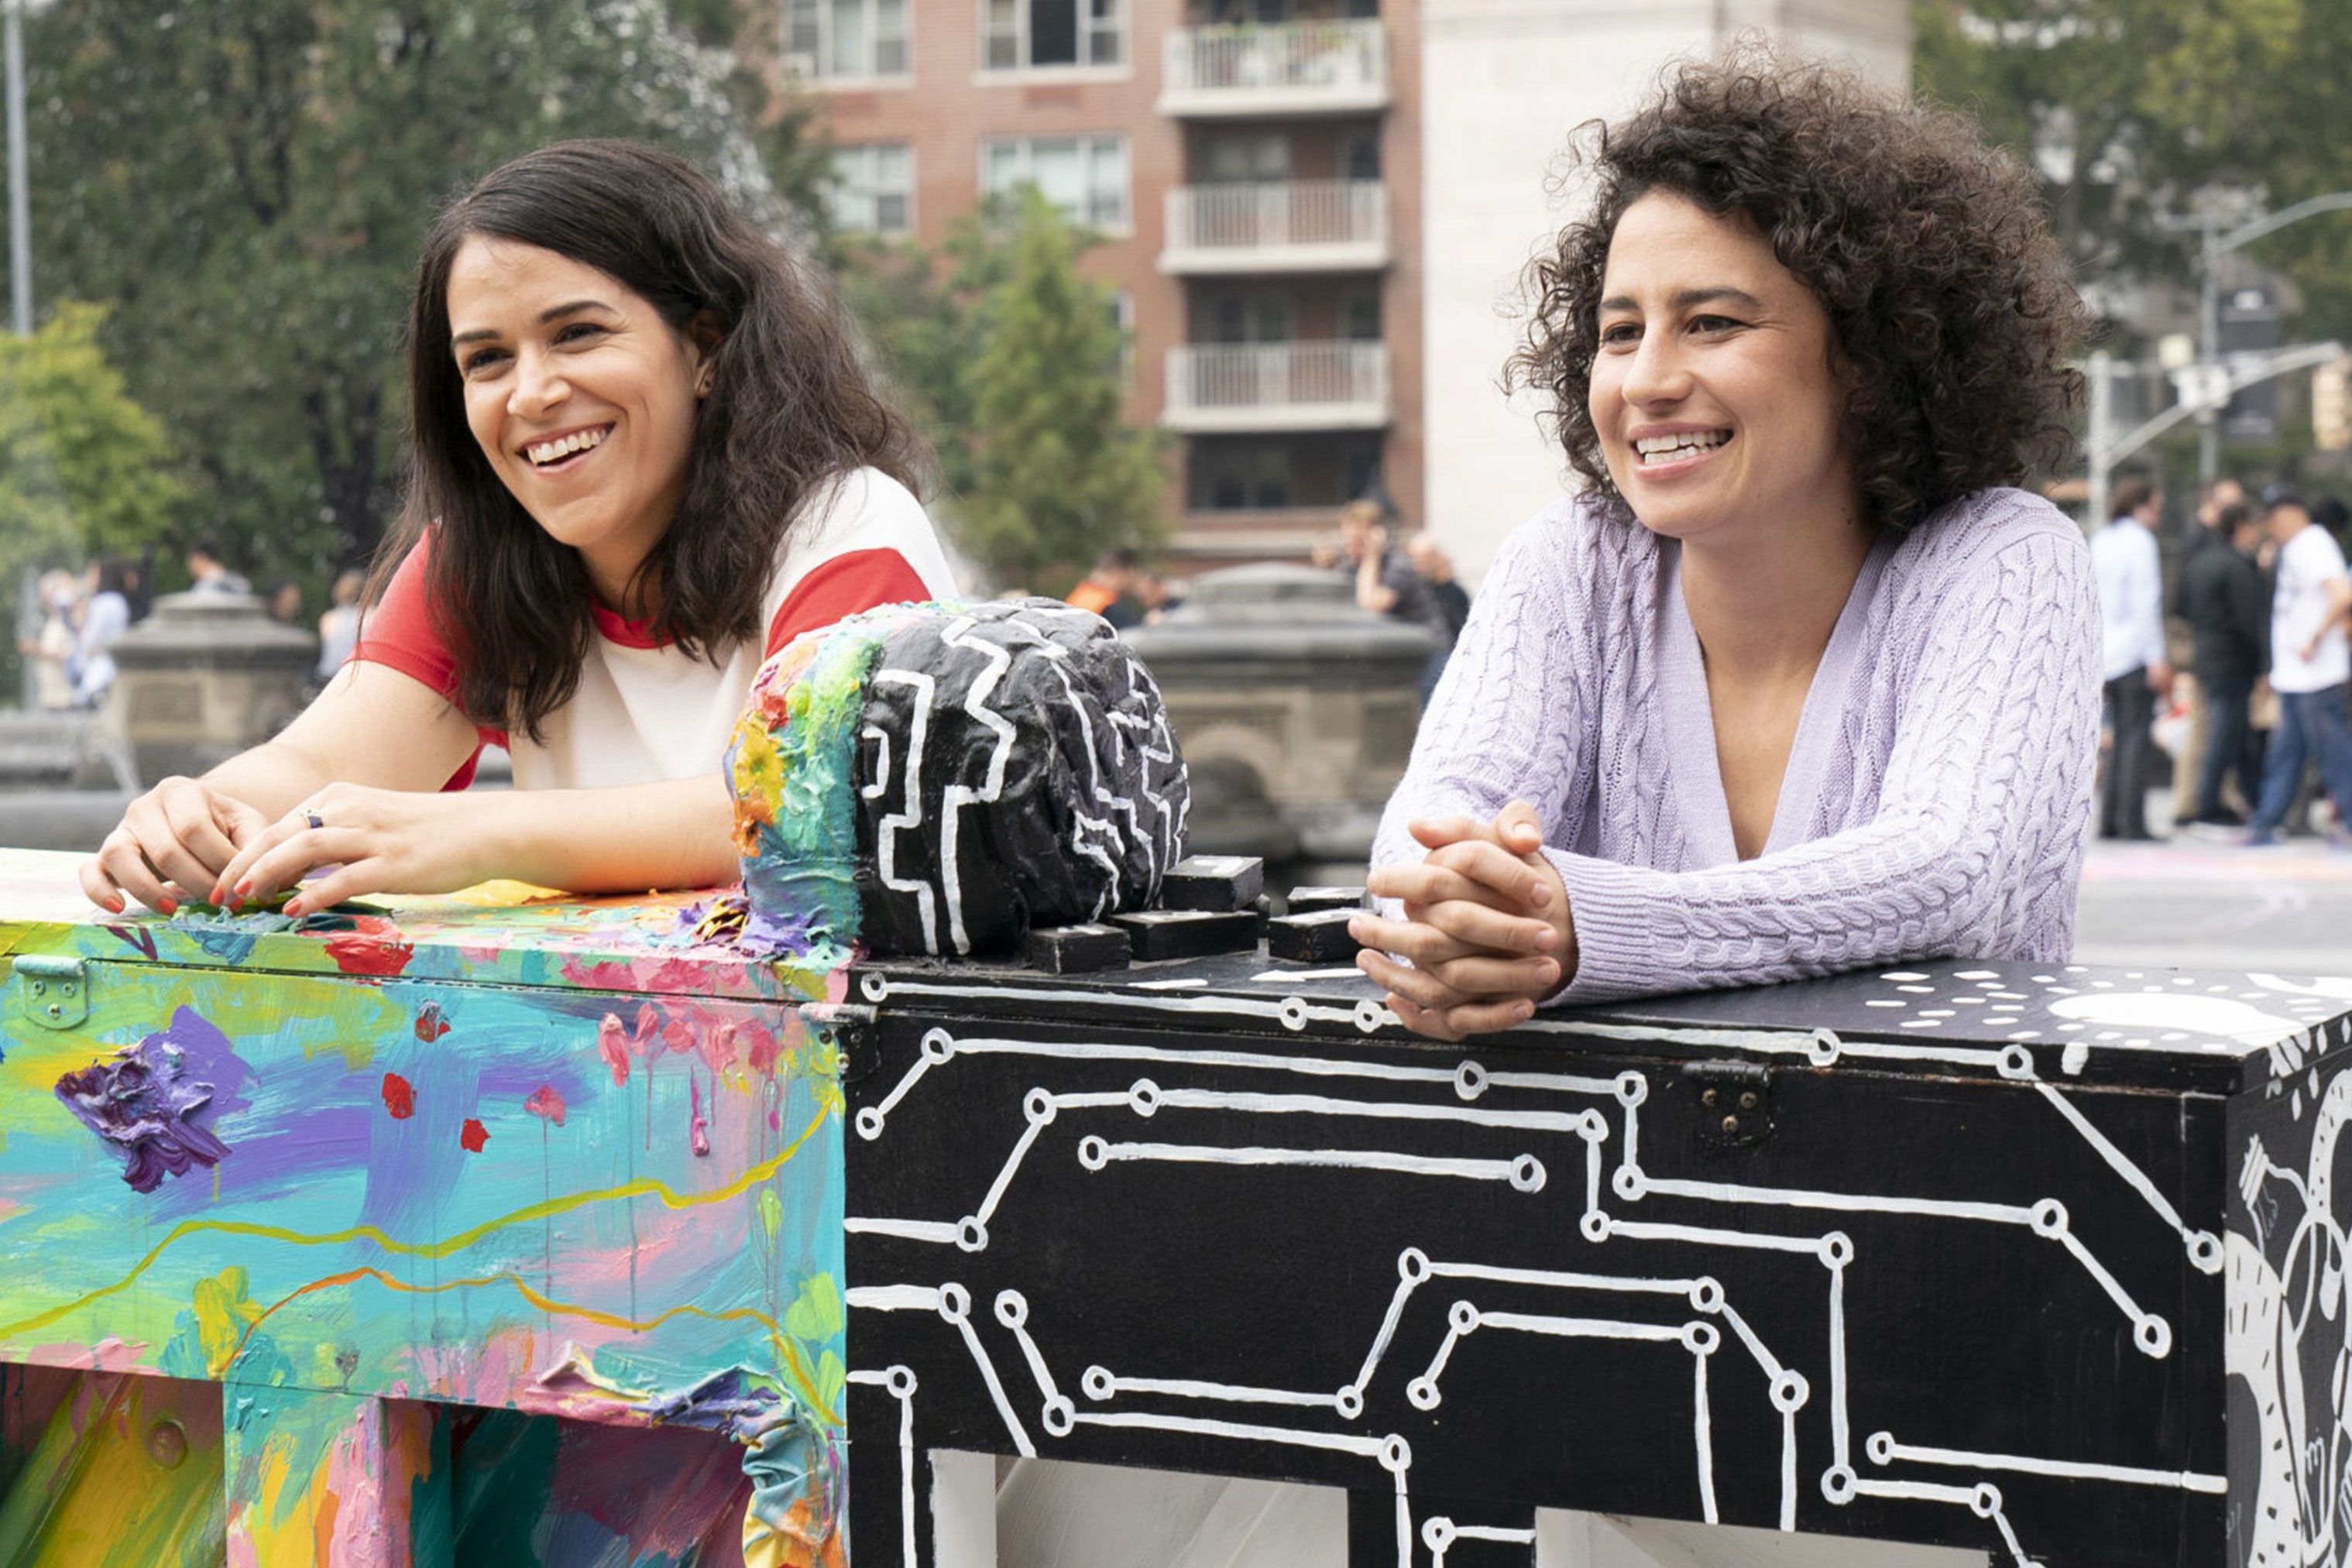 Big Girl Small Pussy Huge Dick Gif - Broad City' Season 5: The Show's Best Running Gags